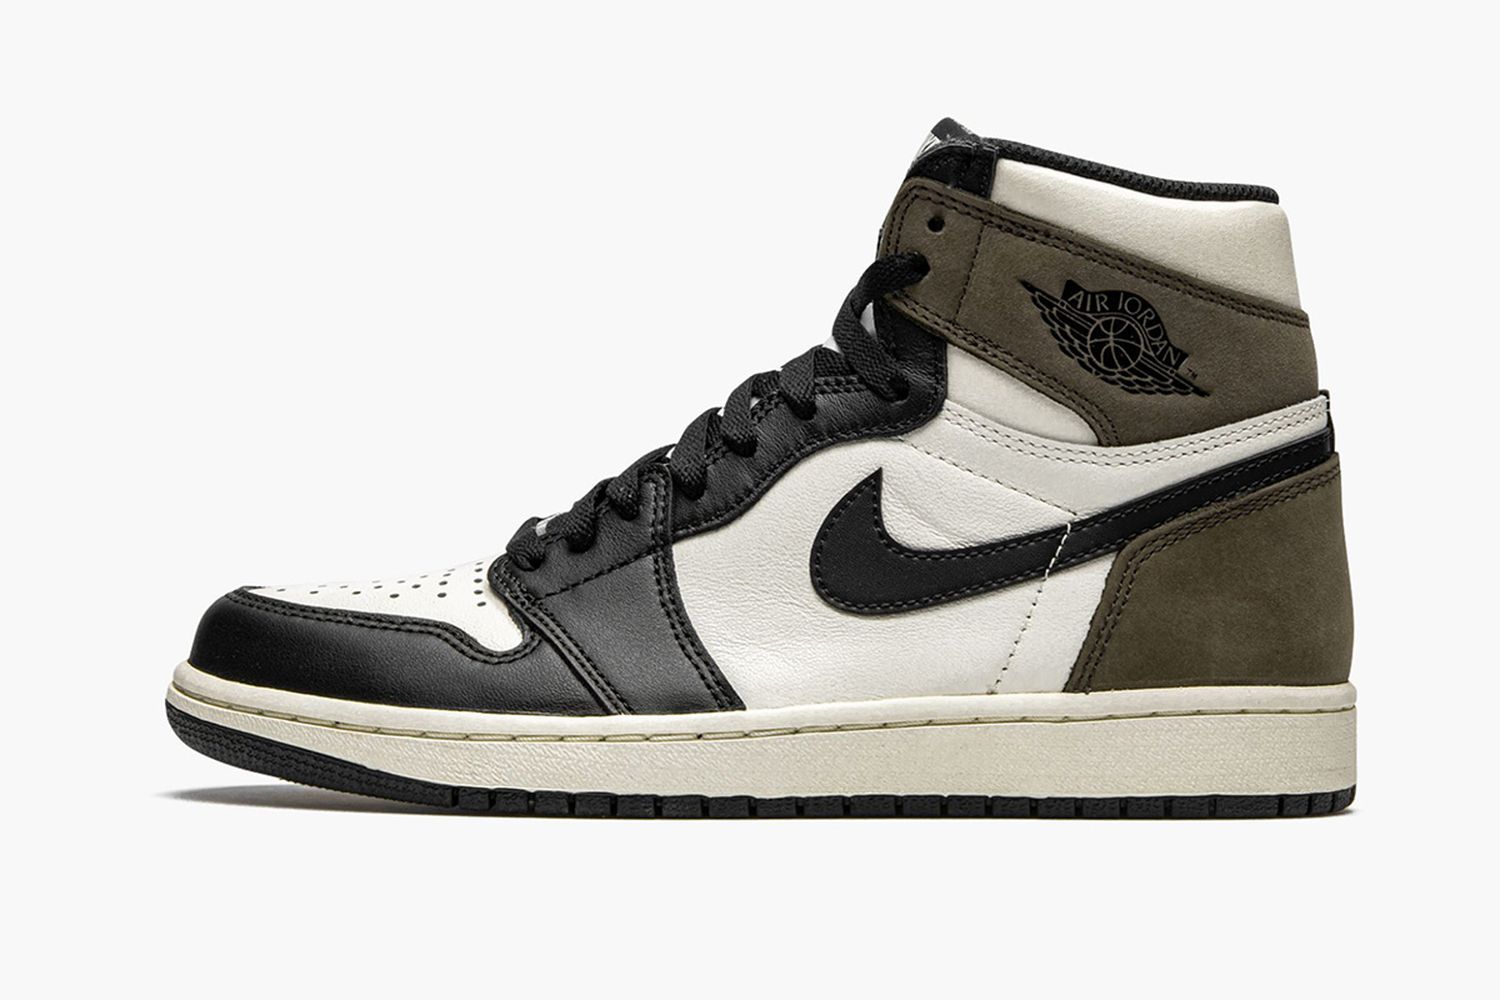 Campaña comedia Saludo 10 of the Best Jordan 1 High Colorways for 2022